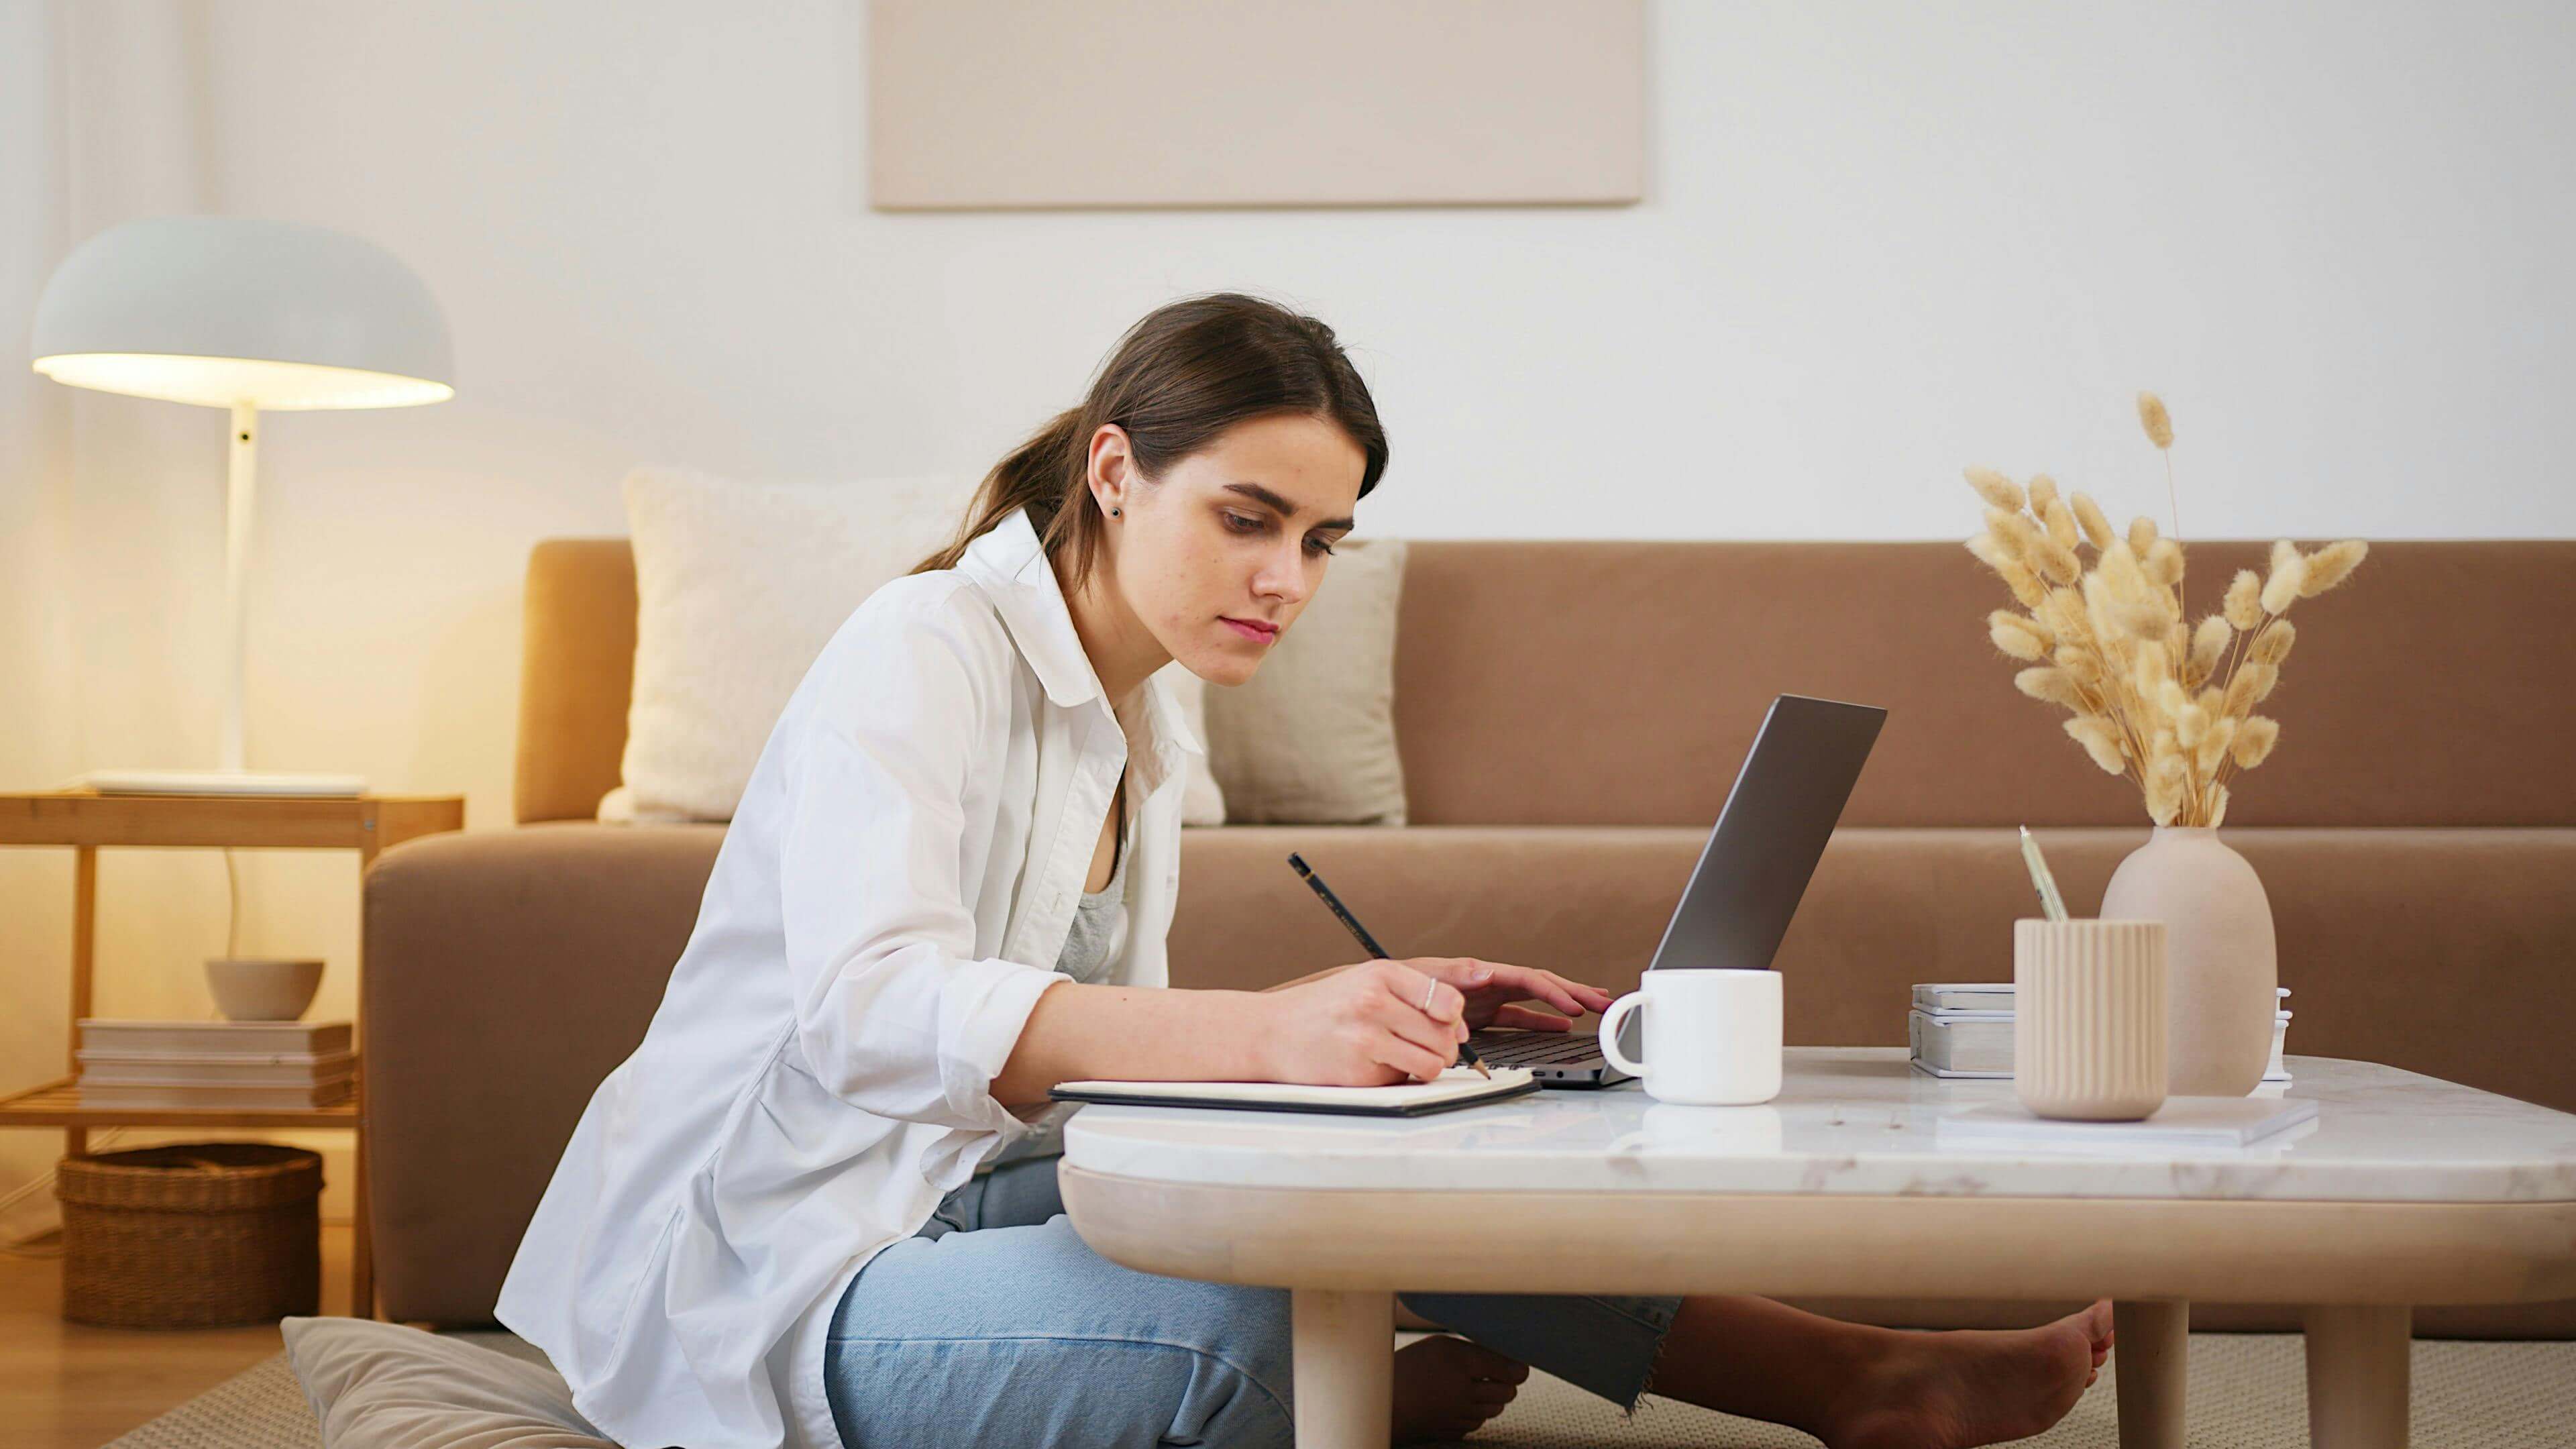 Woman sitting on ground with low table in living room in front of computer taking notes.